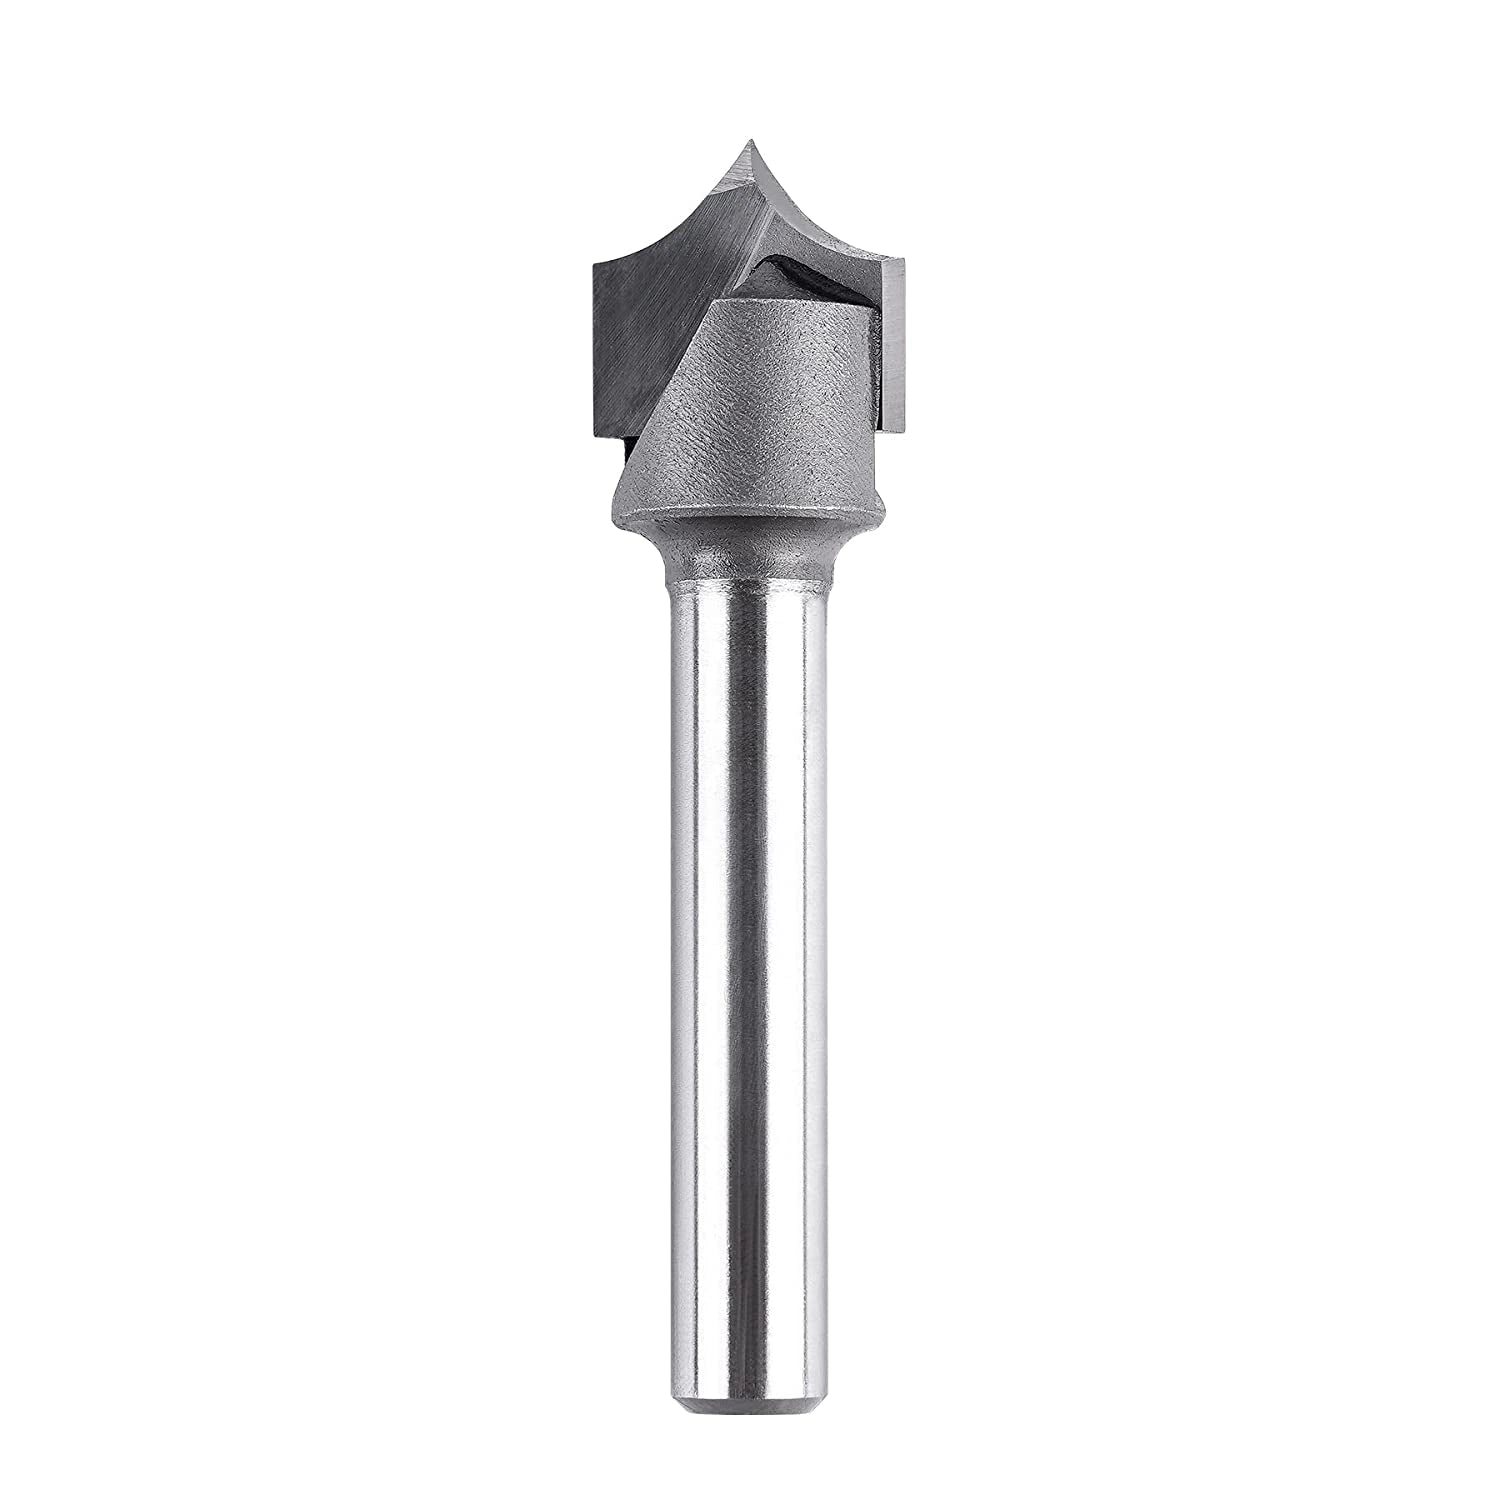 SpeTool Carbide Tipped 1/4 R 1/2 Dia 1/4 Shank Round Over Router Bit